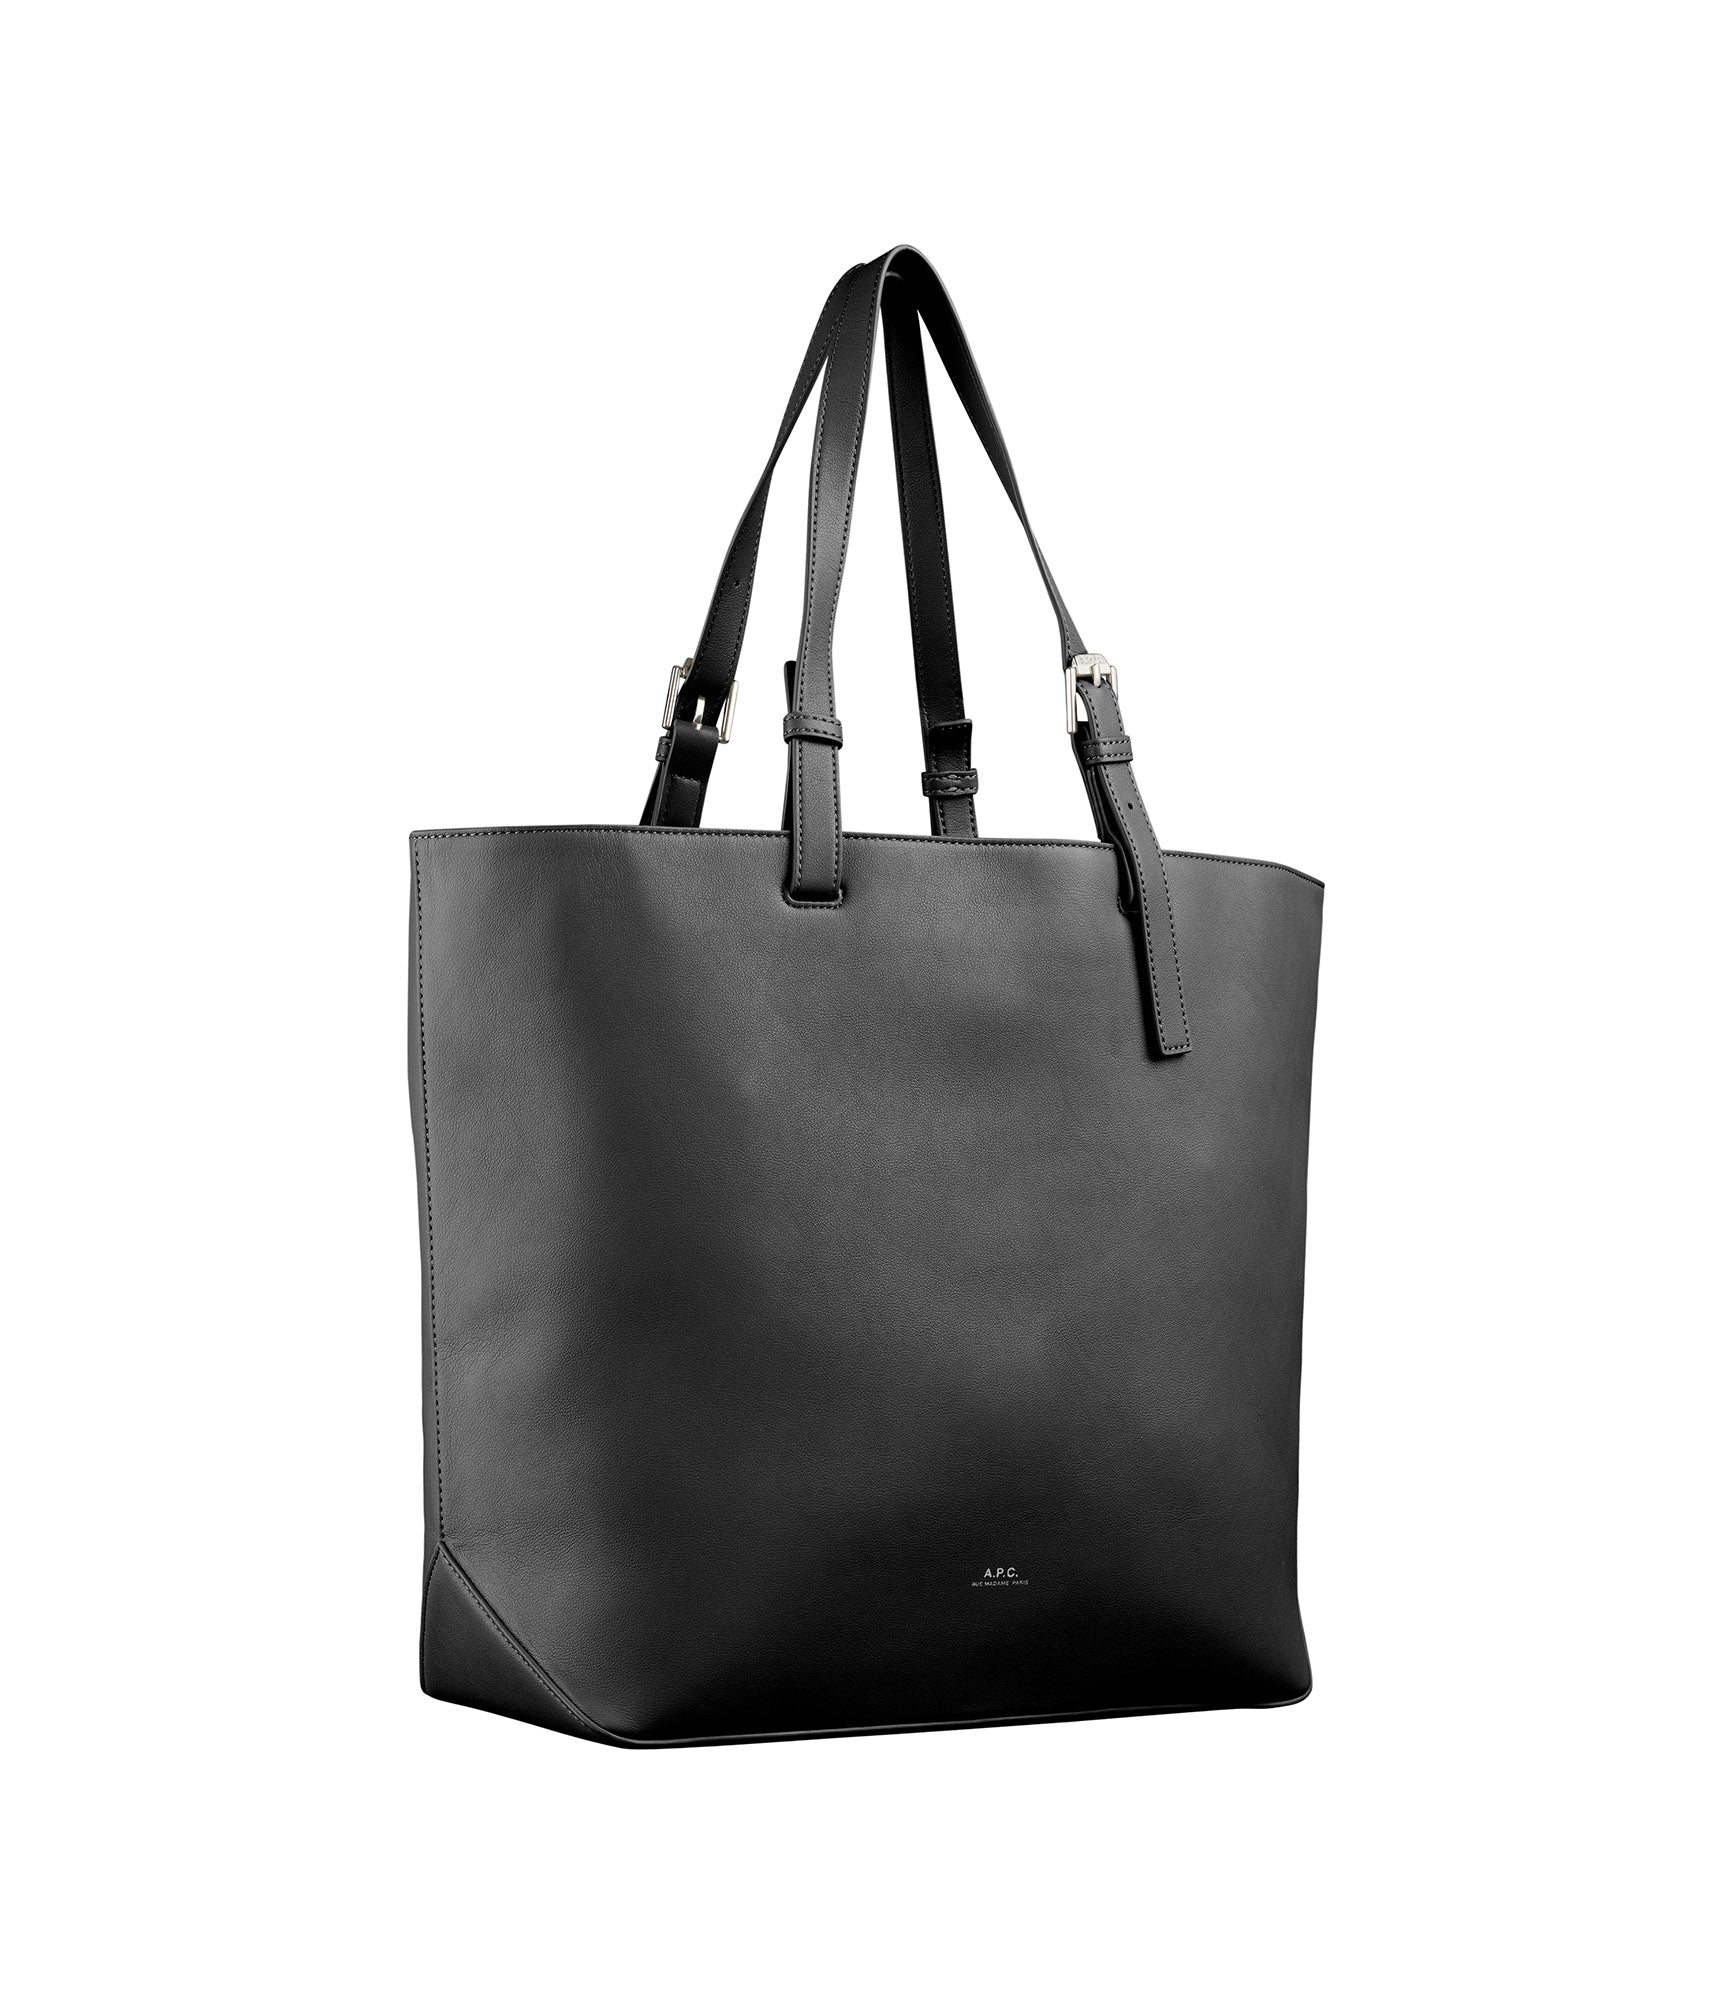 Nino Small shopper tote | Small shopper tote in recycled leather 